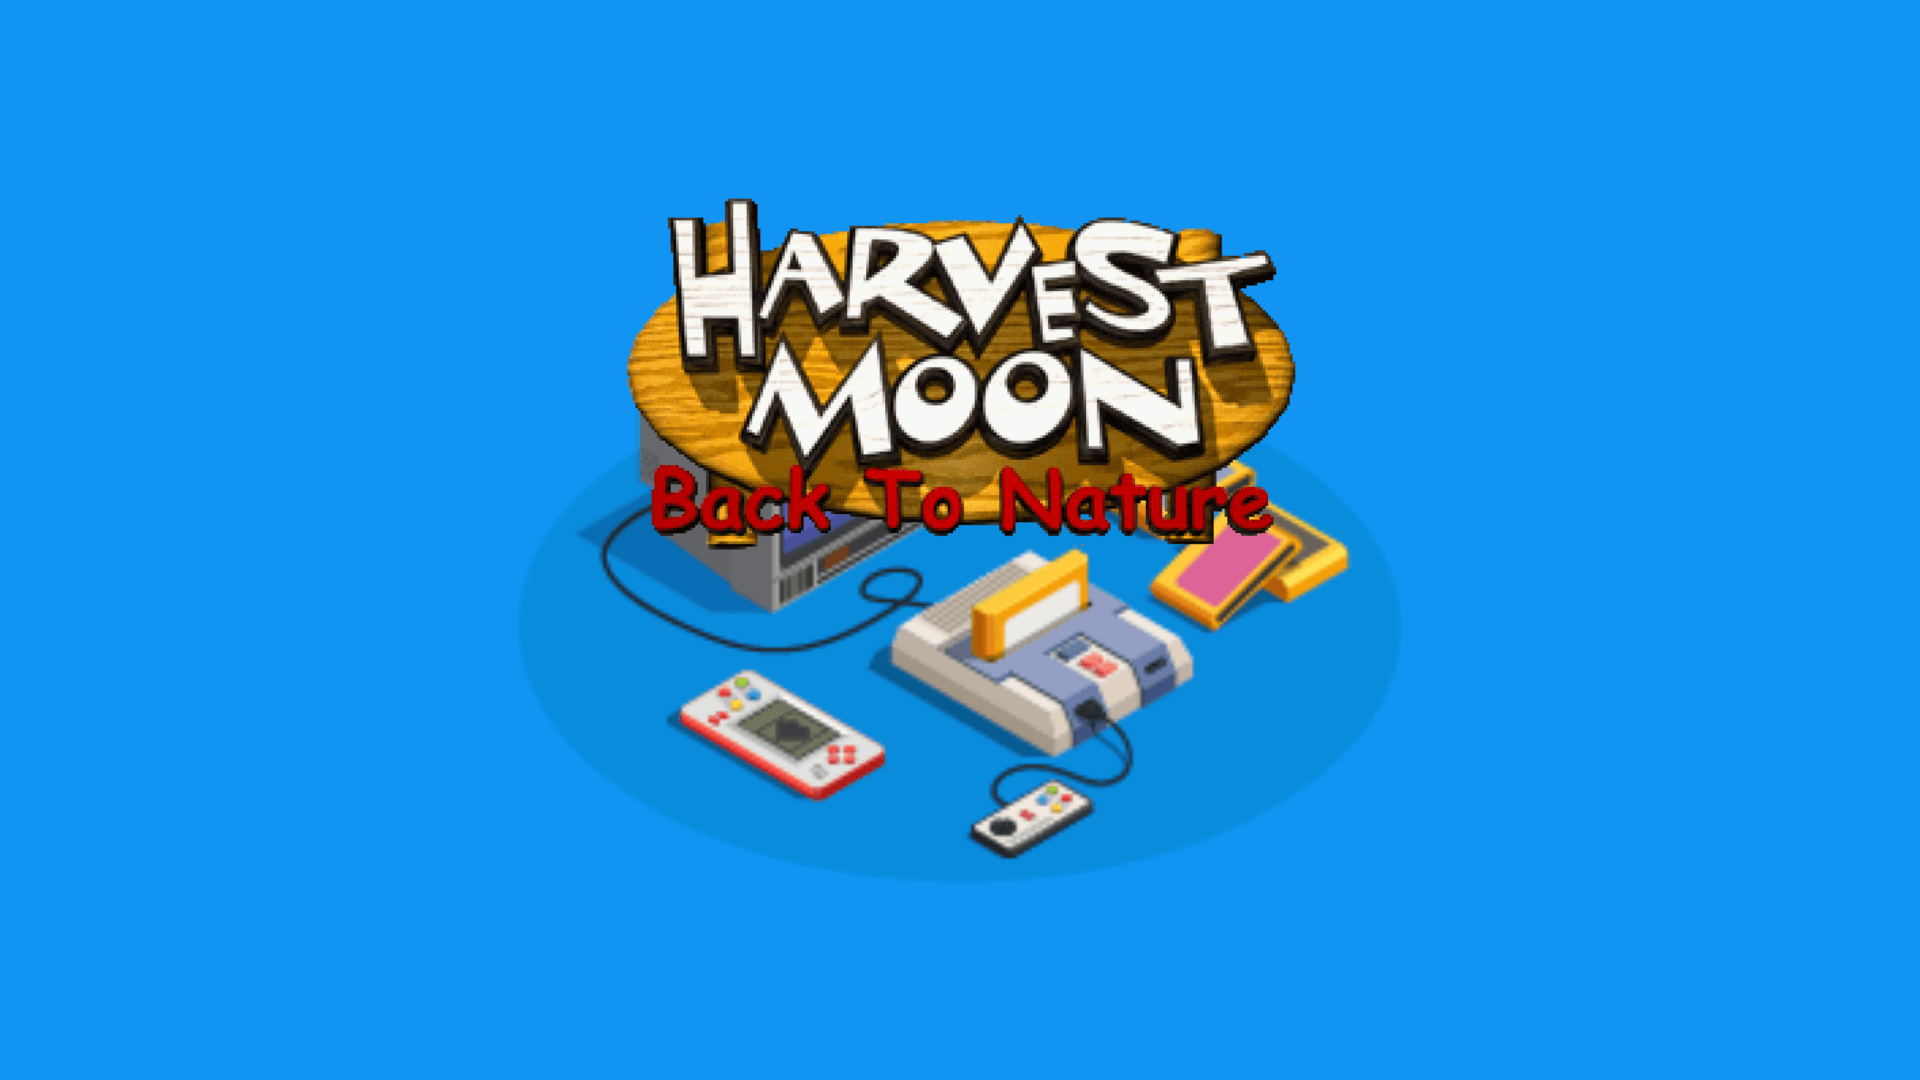 Download Harvest Moon For Android. Download Harvest Moon Back to Nature Android, PC, dan Laptop